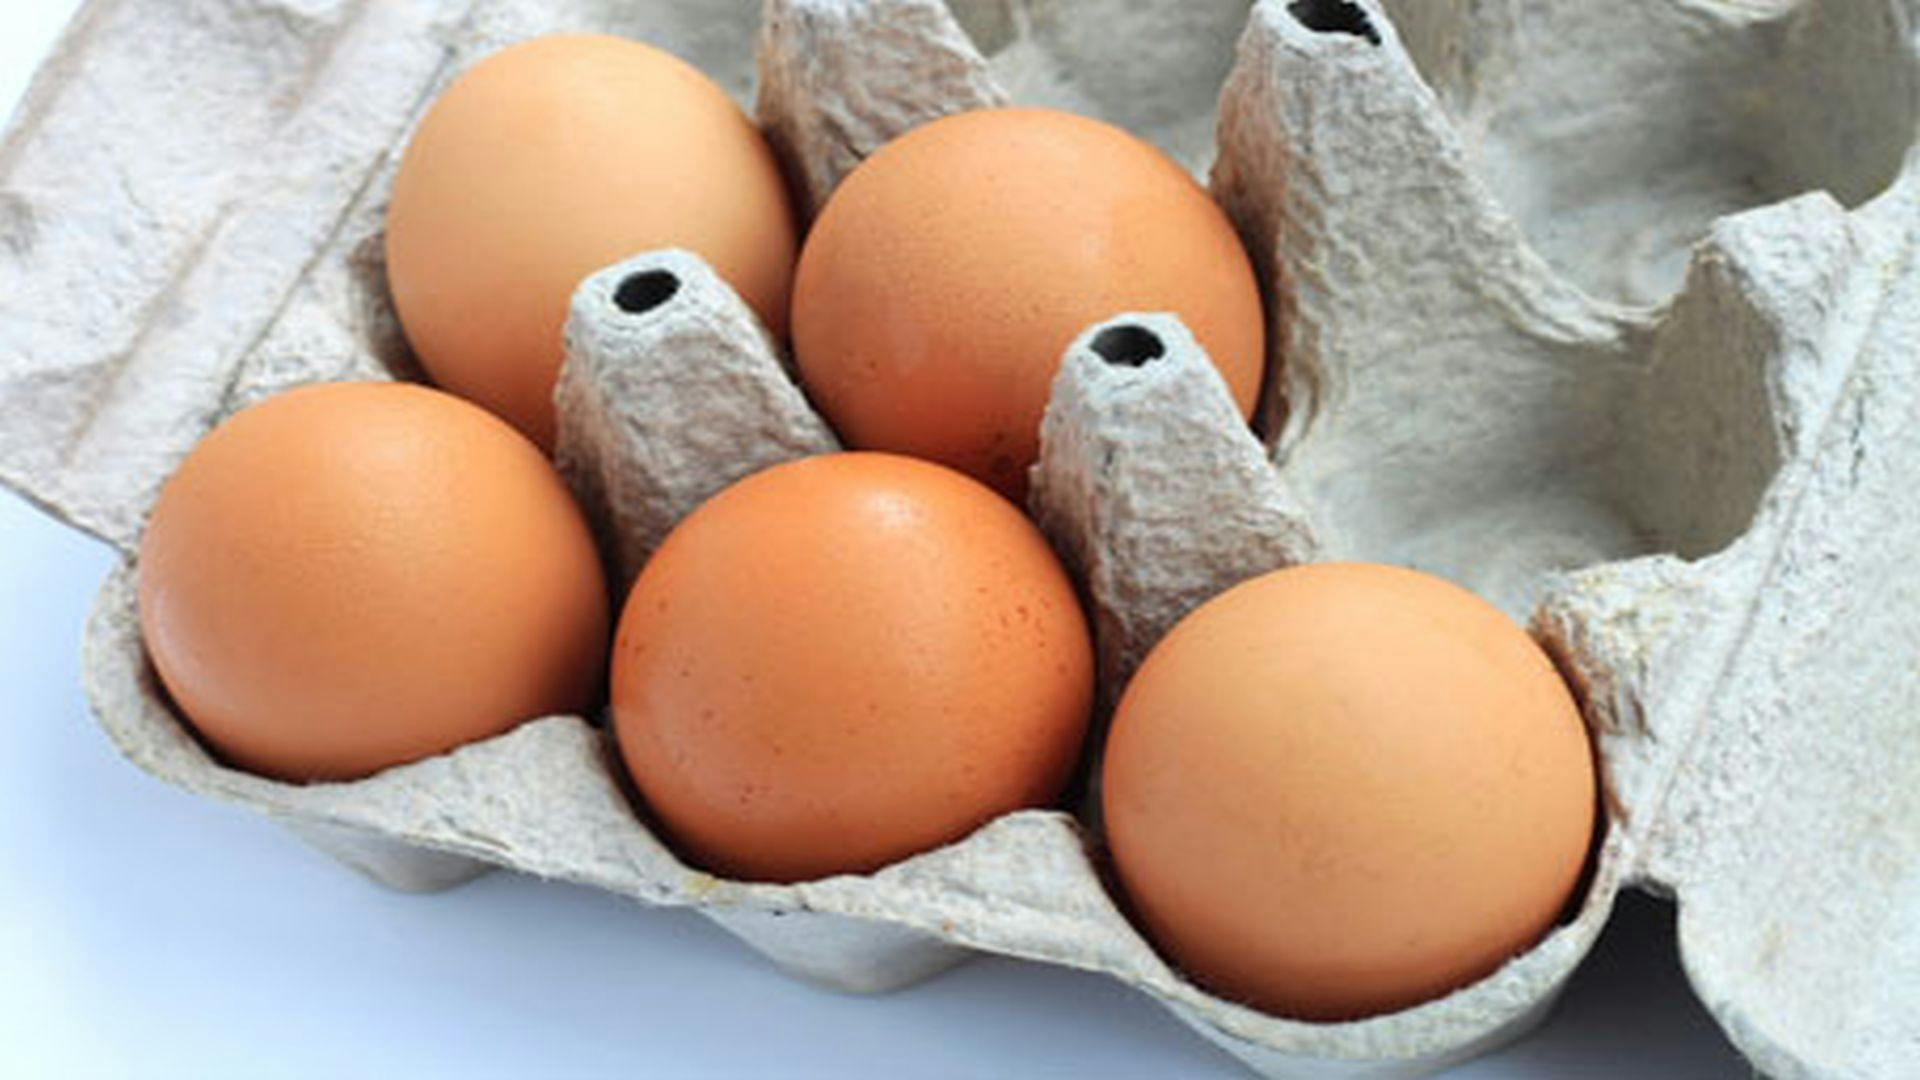 CDC Offers Advice for Avoiding Salmonella Infection From Eggs